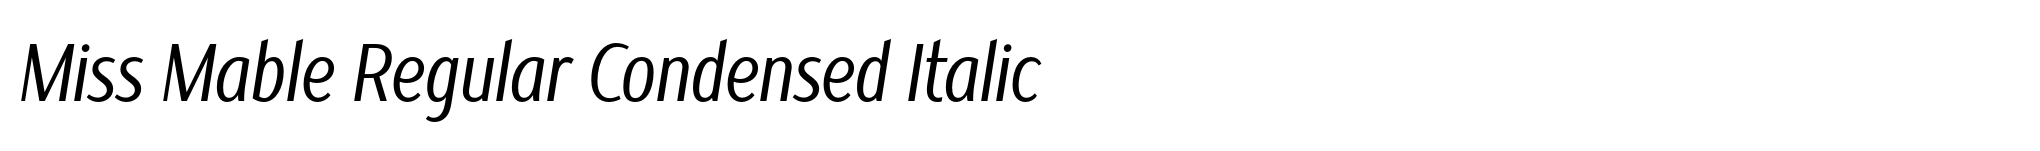 Miss Mable Regular Condensed Italic image